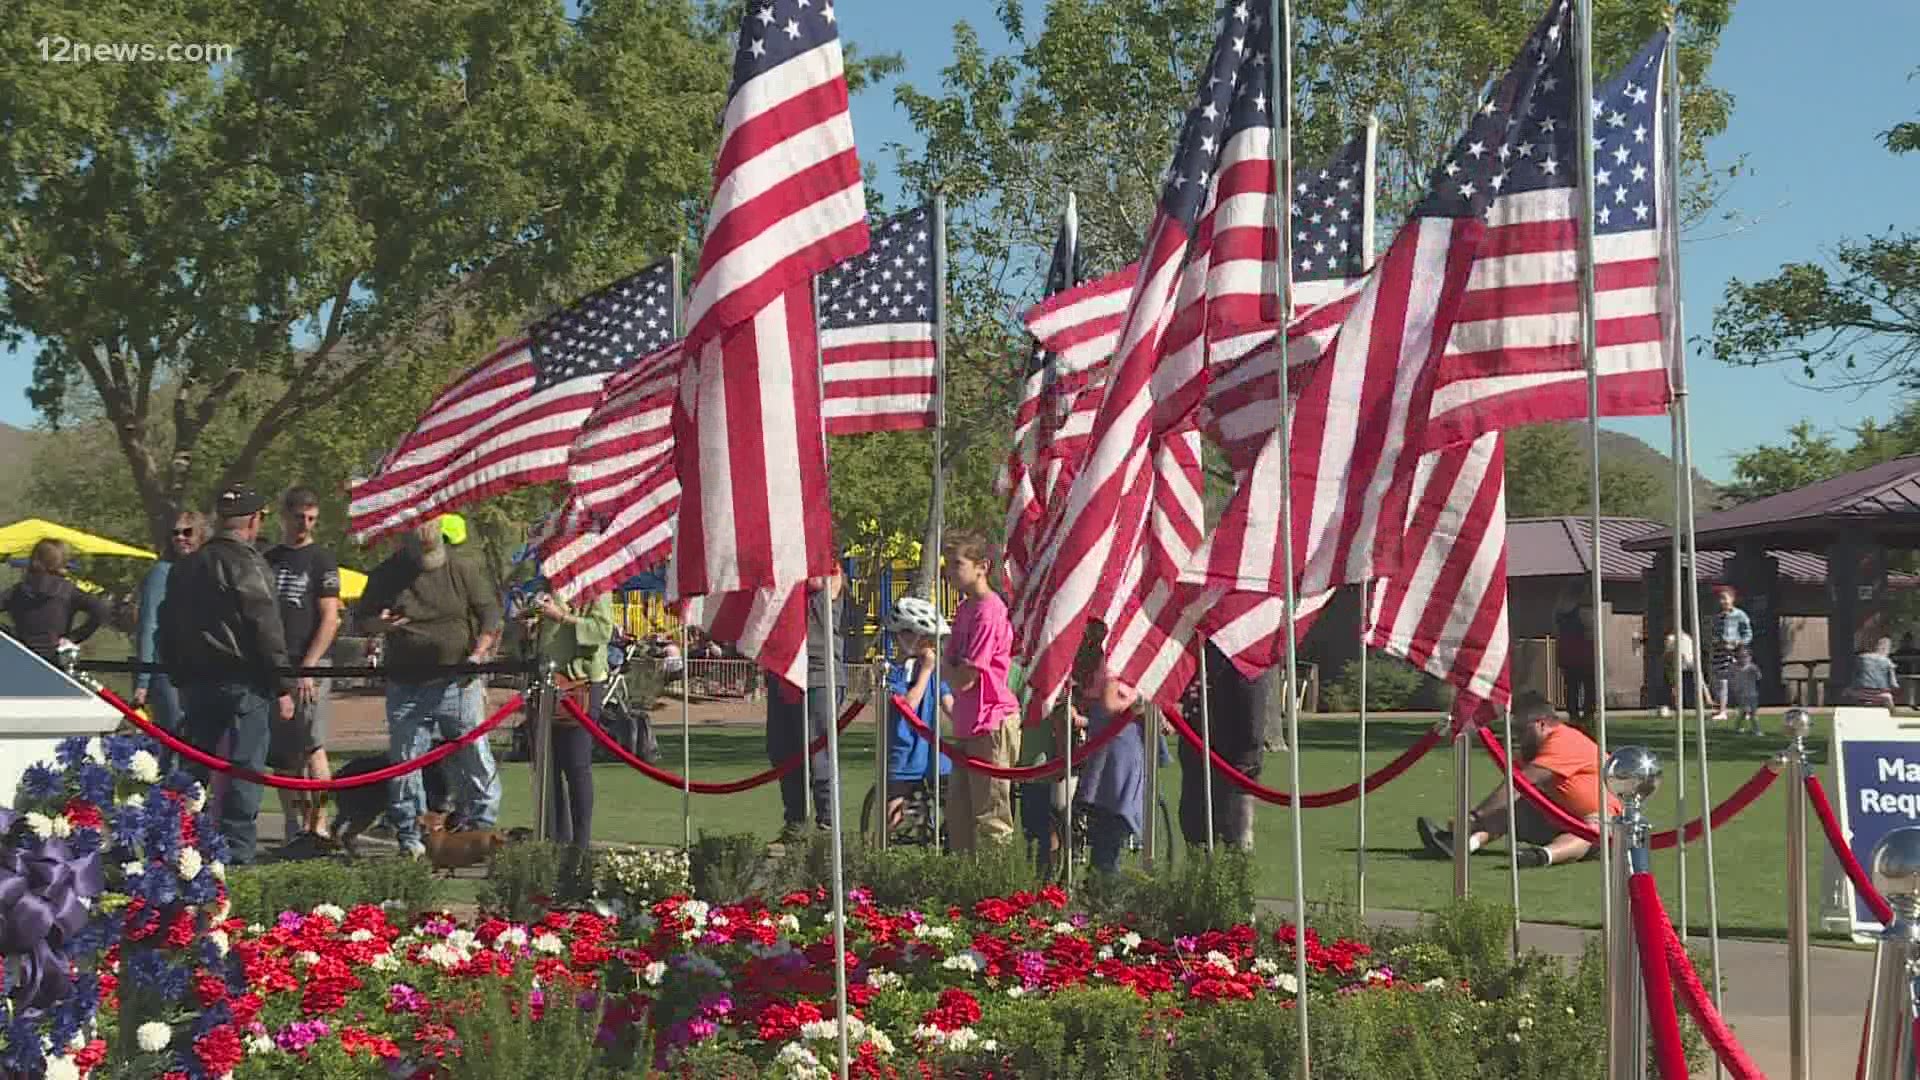 Today is Veterans Day. Many around the Valley commemorated the day and paid their respects to veterans. Two veterans in Anthem tell us what service means to them.